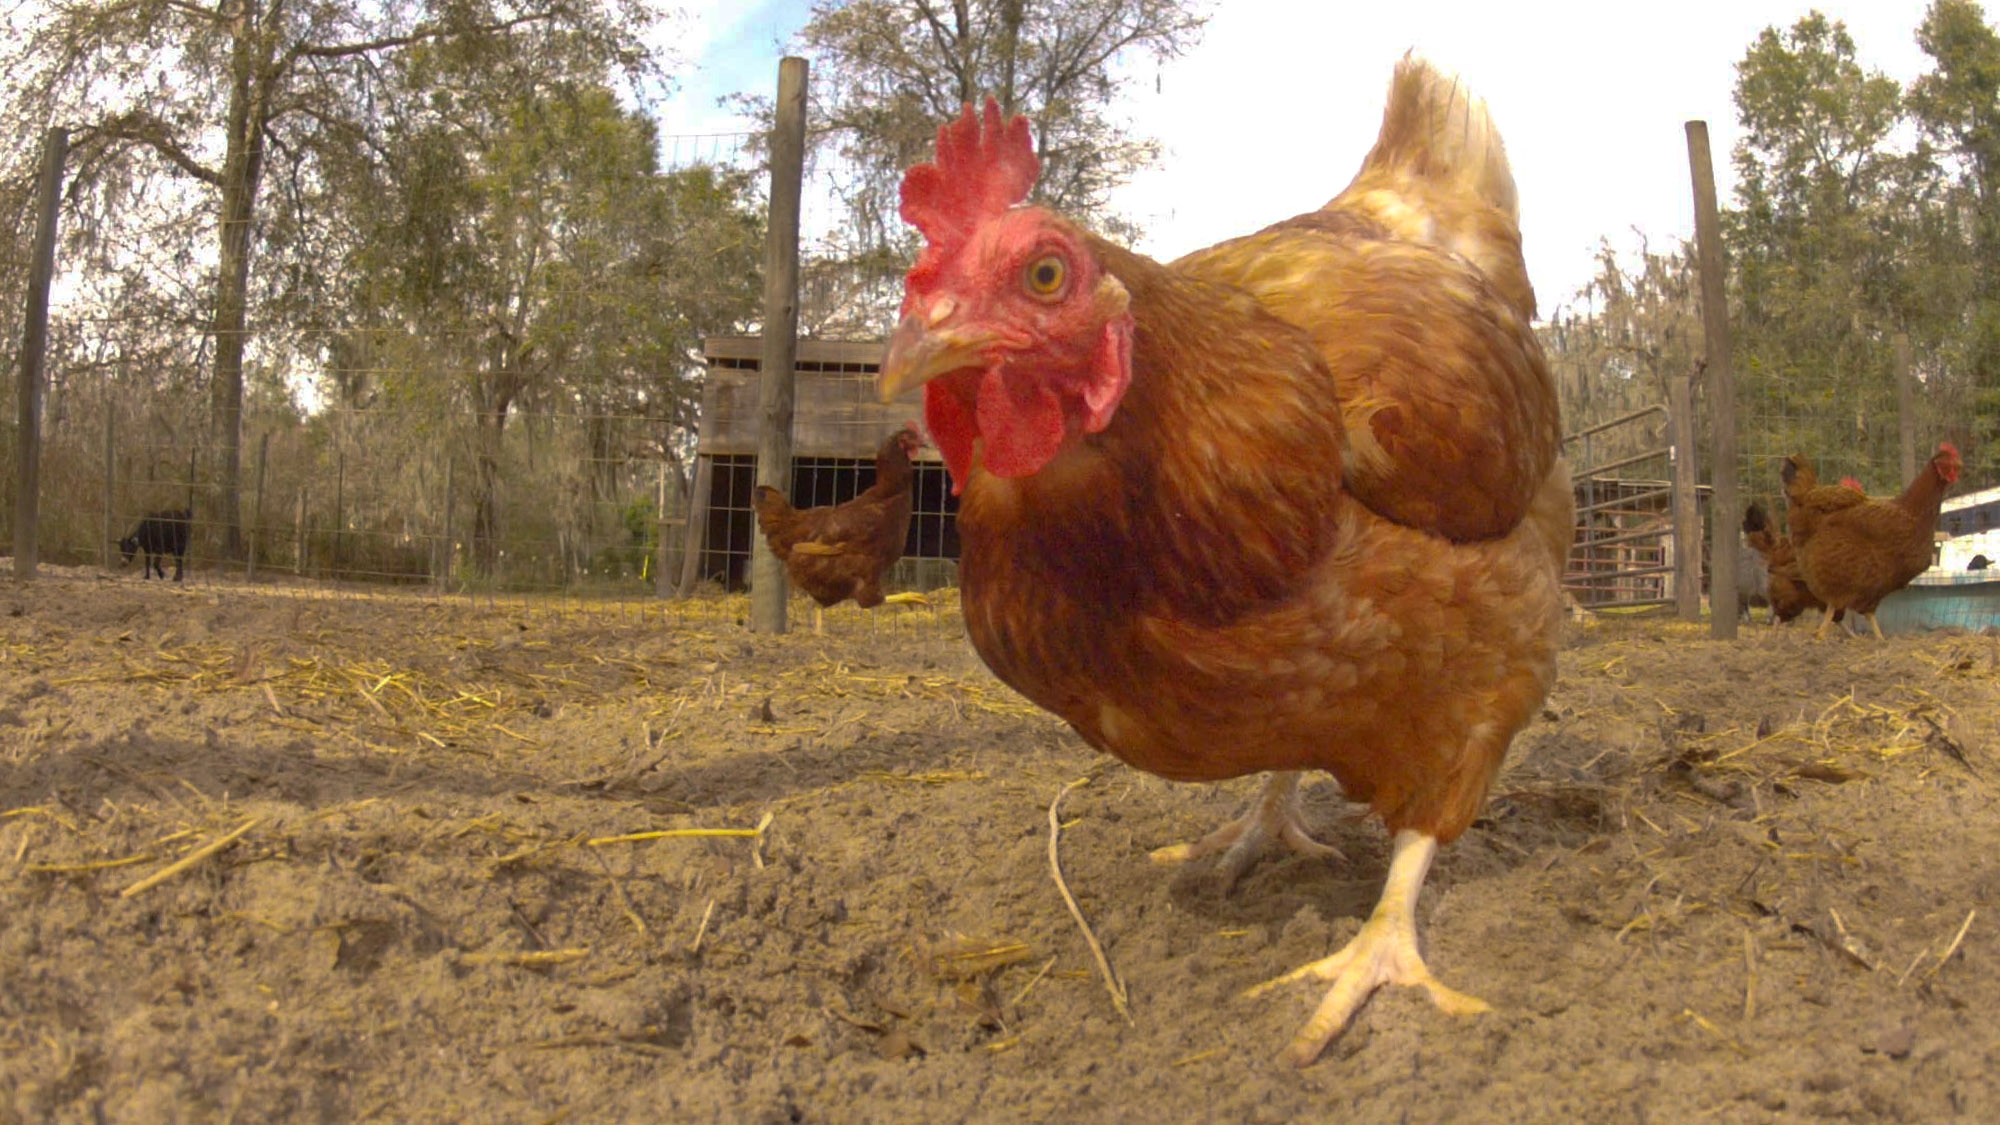 Keeping Your Chickens Happy and Healthy Through The Dog Days of Summer